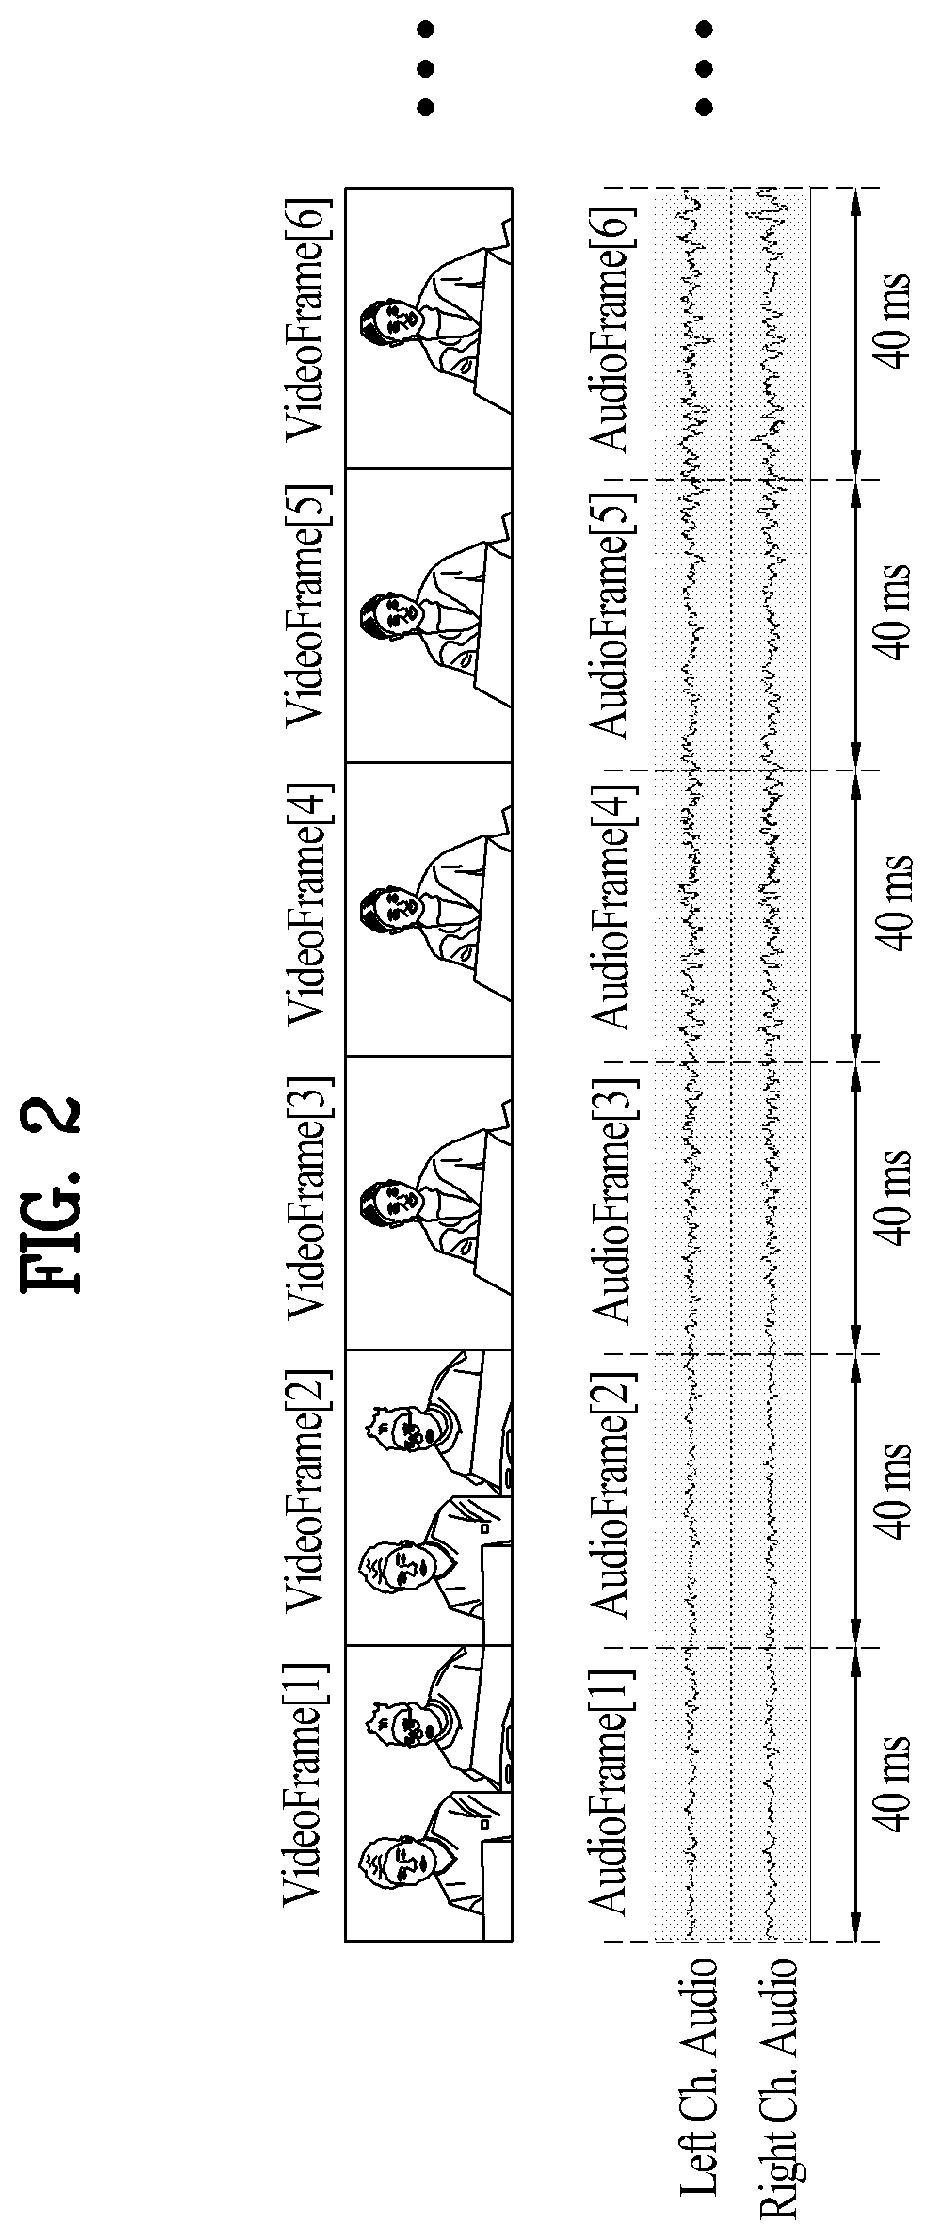 Method and apparatus for sound object following